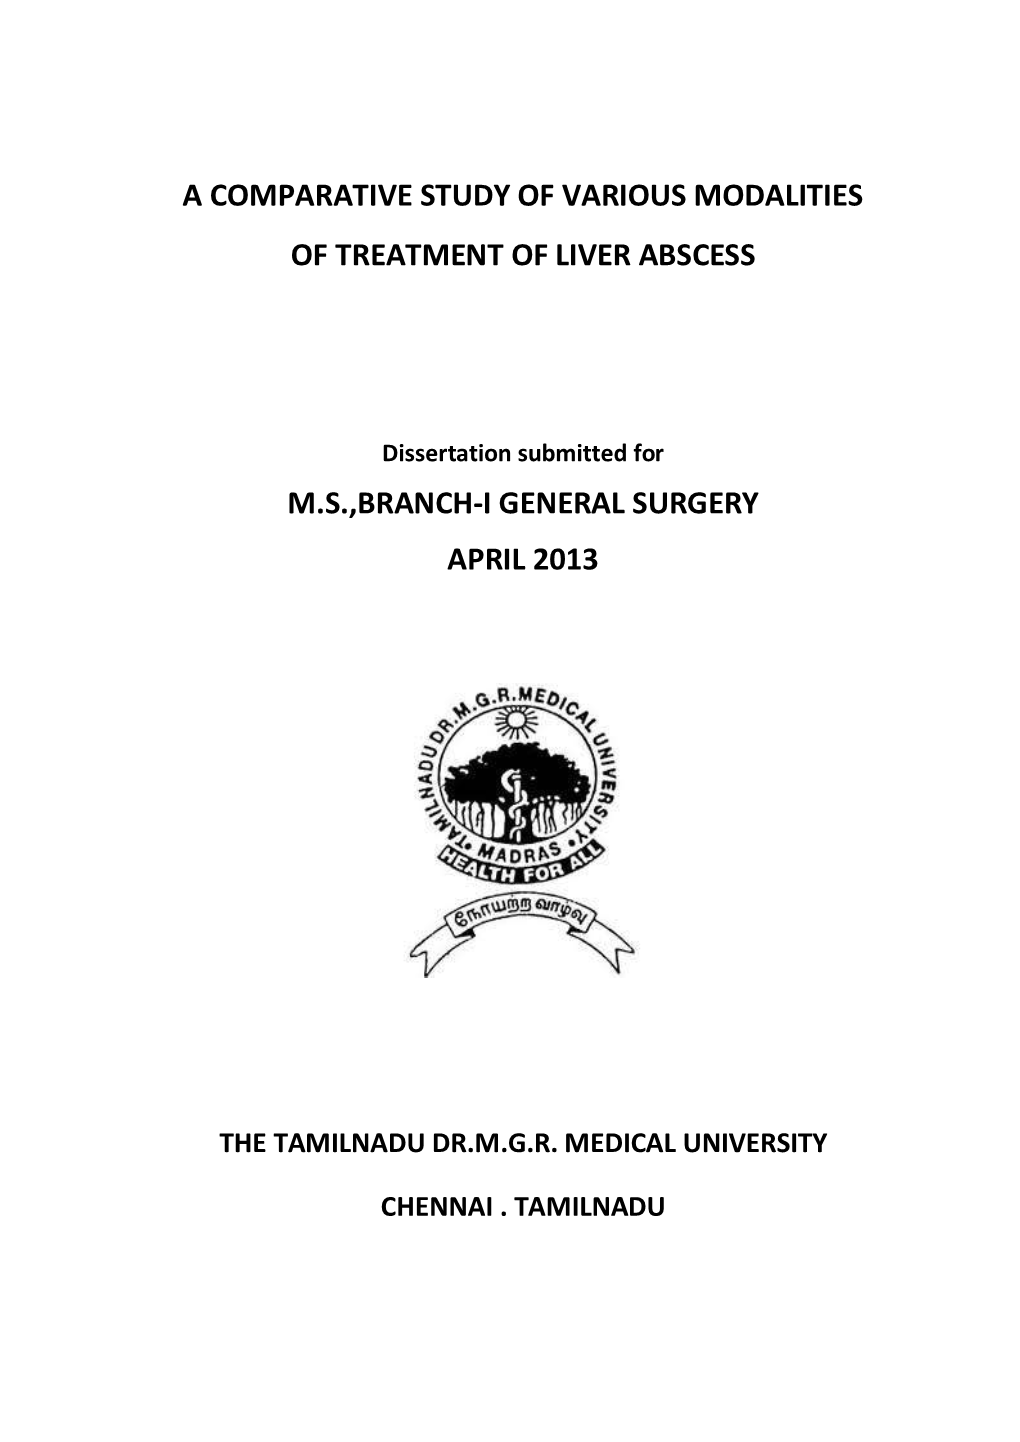 A Comparative Study of Various Modalities of Treatment of Liver Abscess